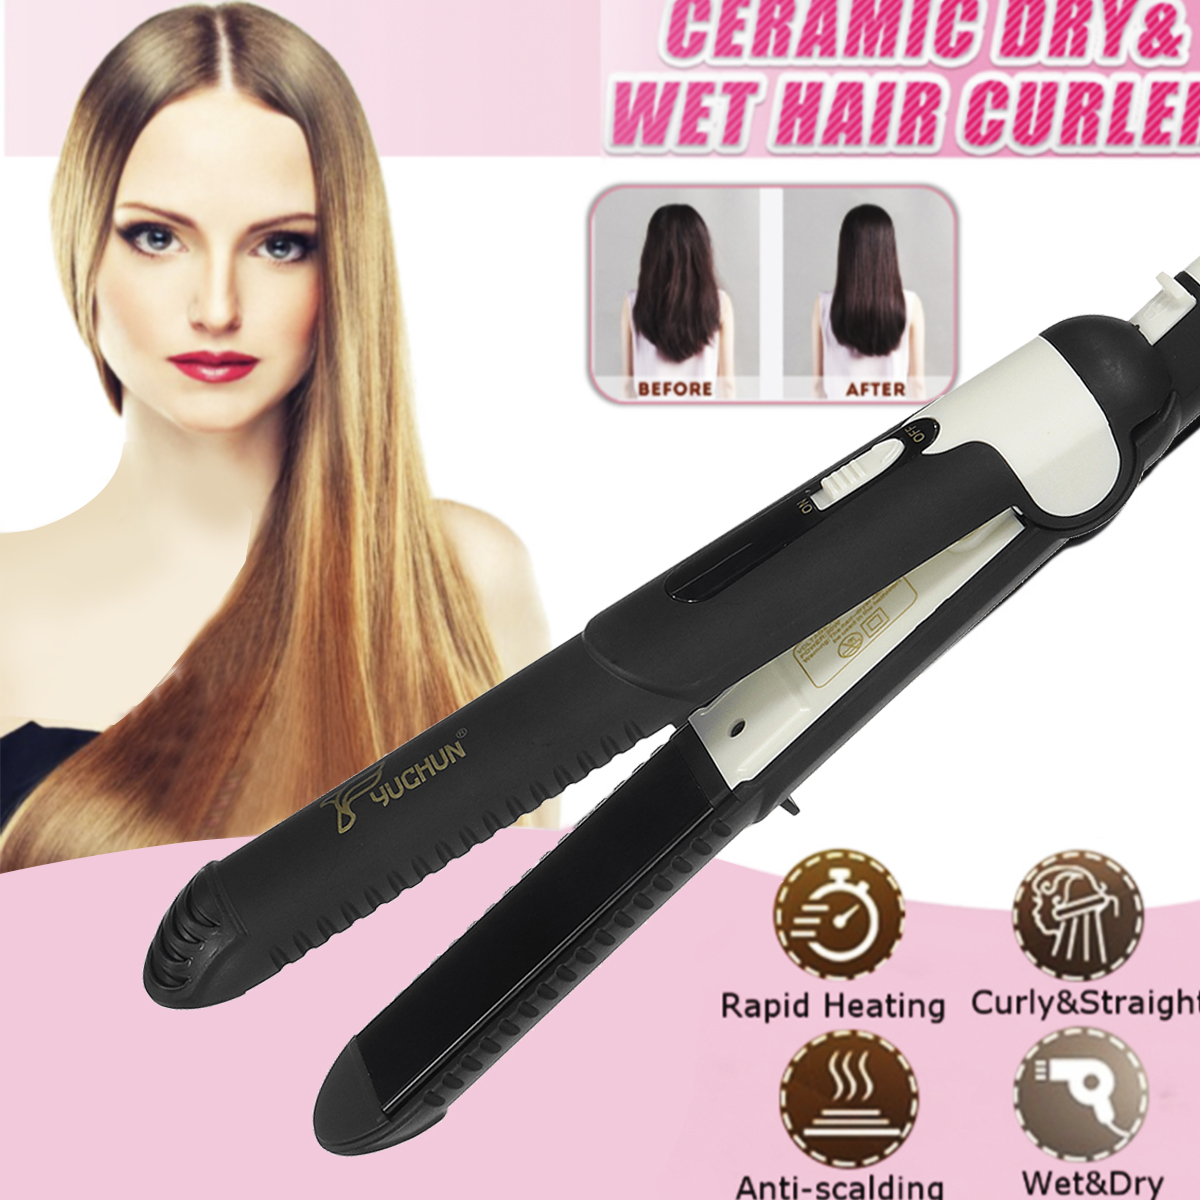 2-In-1-Portable-Curler-Straightener-Tourmaline-Ionic-Flat-Iron-Heat-Up-Fast-220V-Hair-Curler-1606091-1